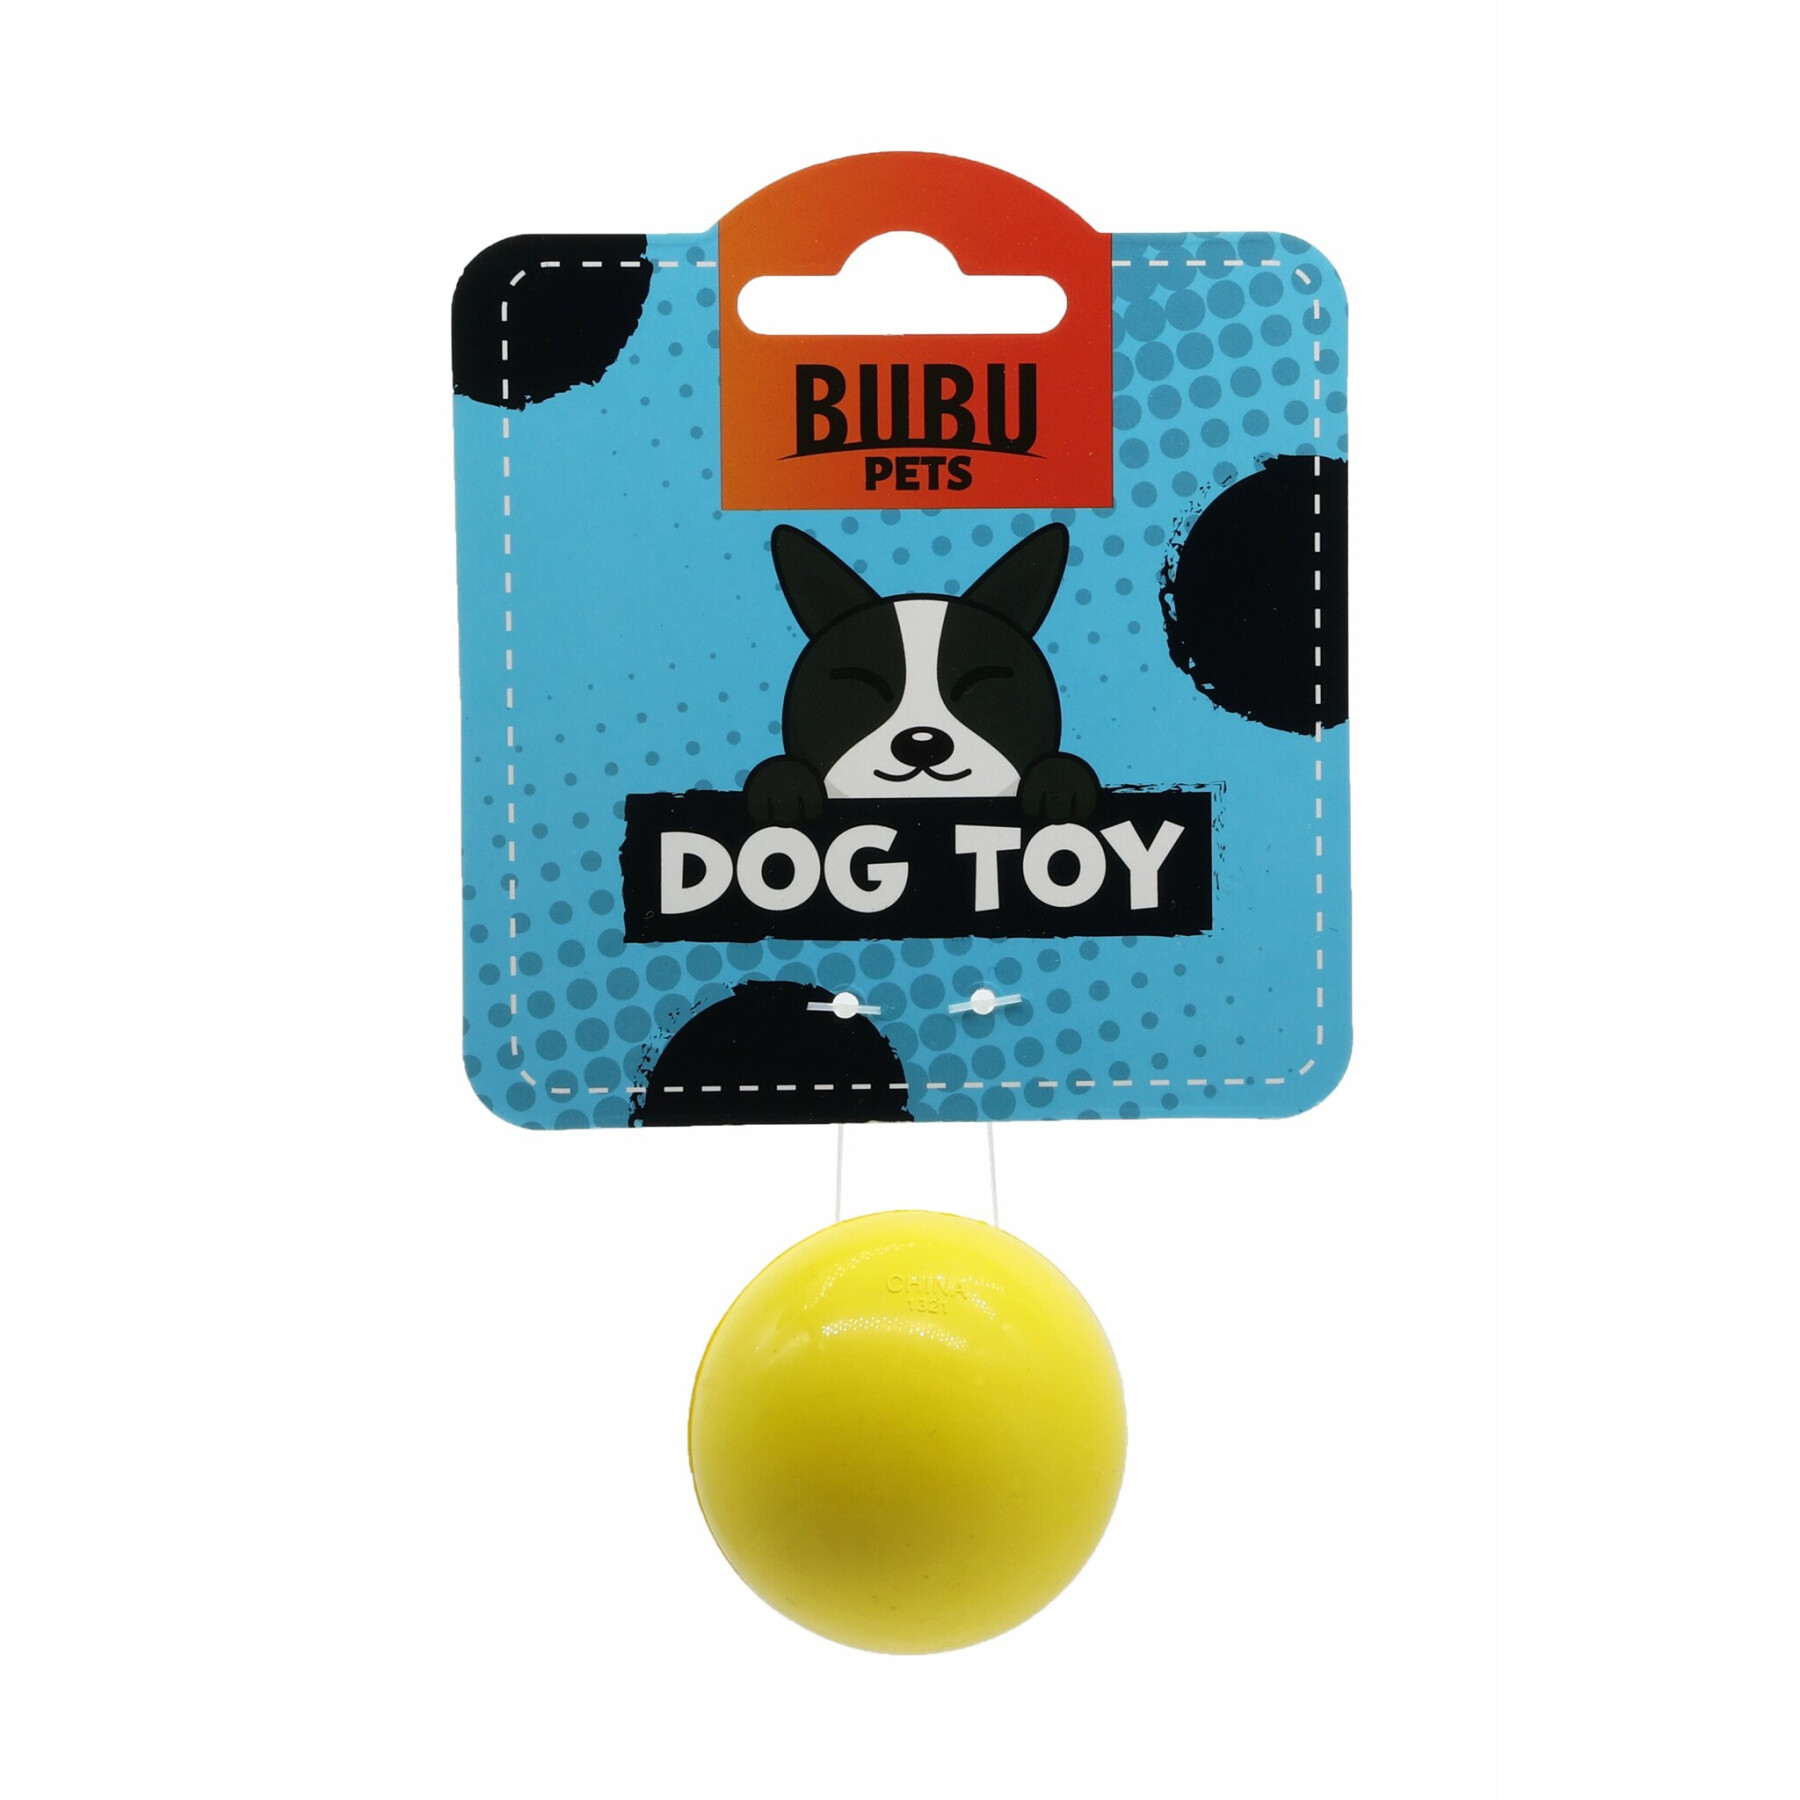 Dog toy solid rubber ball BUBU Pets